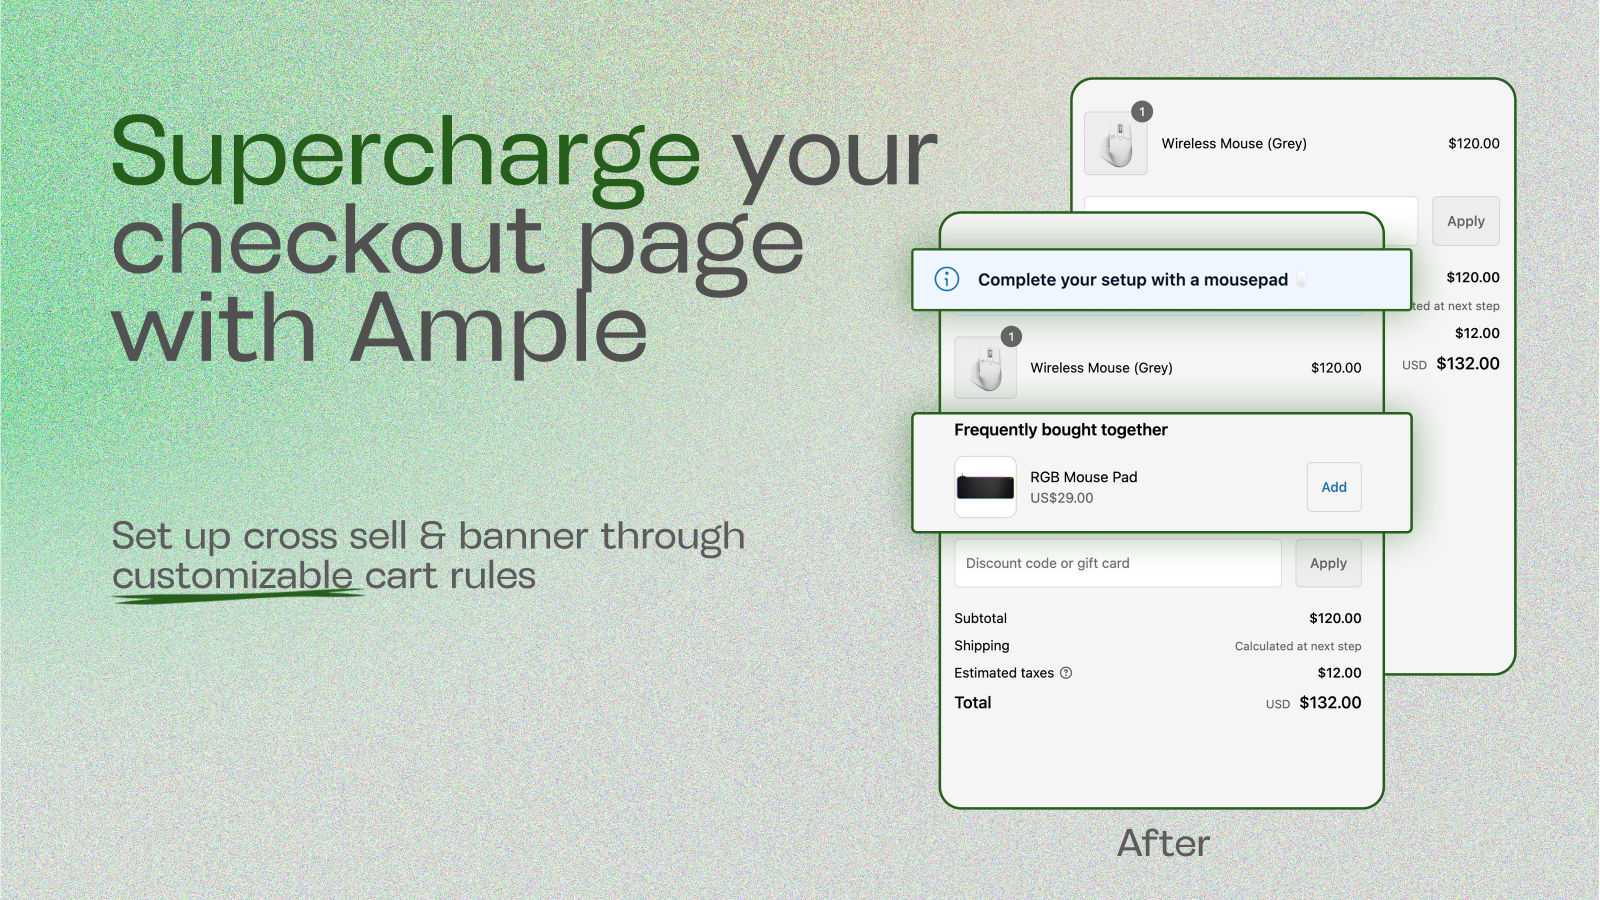 Supercharge your checkout page with Ample